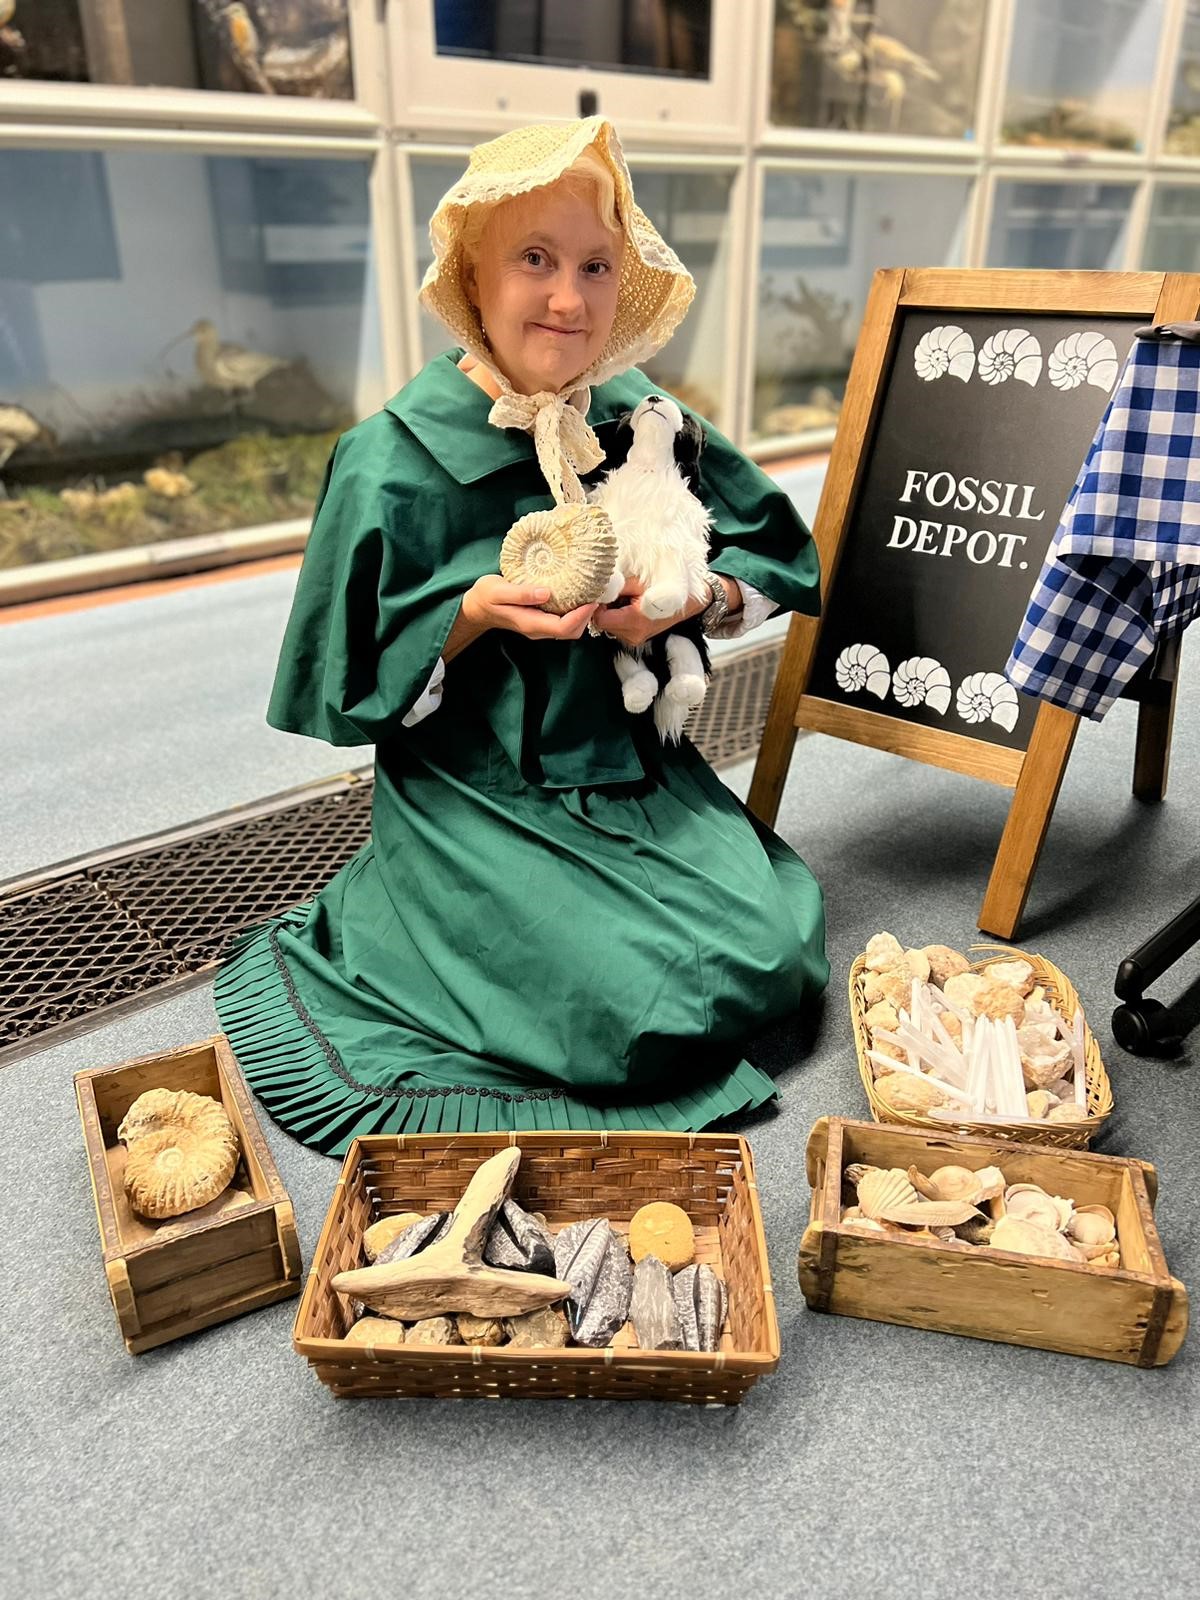 A woman dressed as Mary Anning poses with fossils at the Booth Museum.